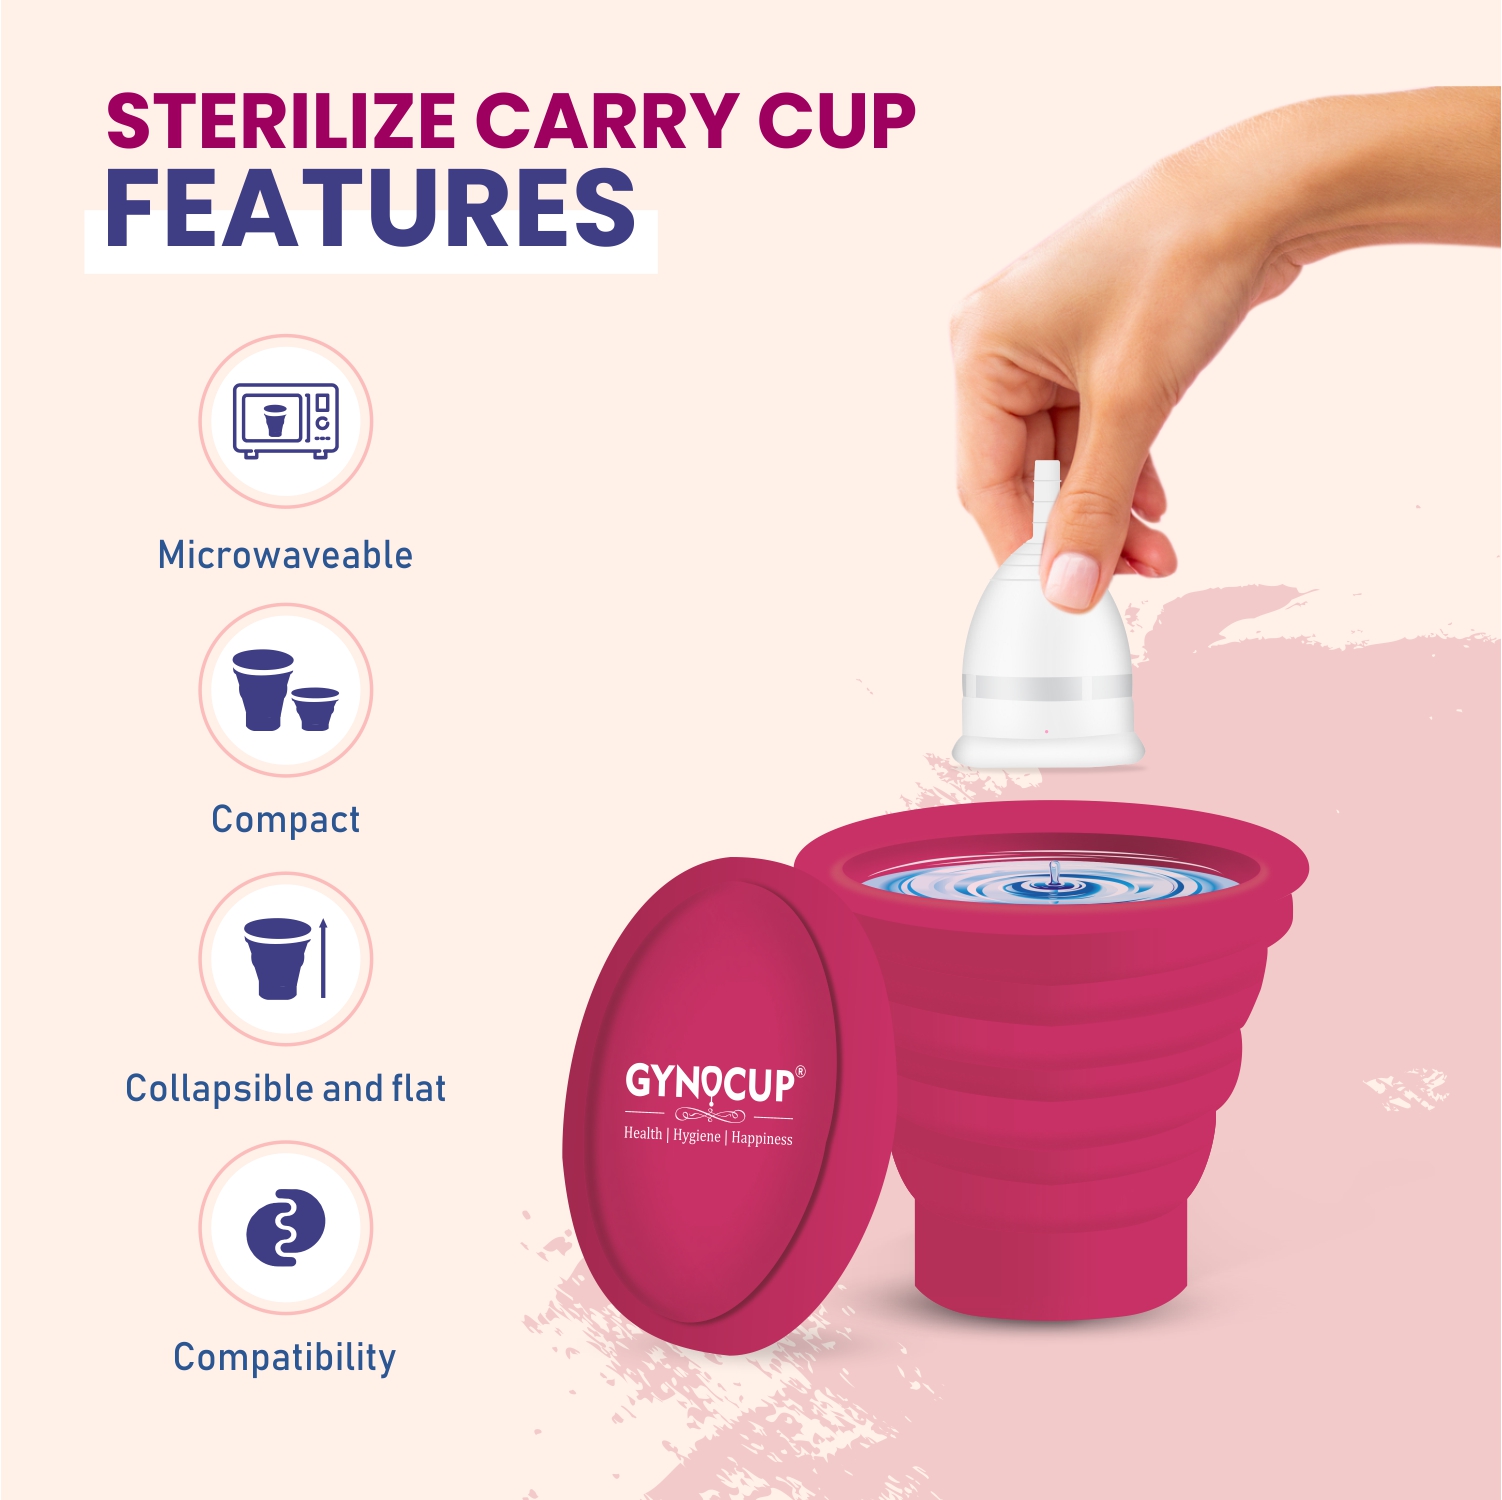 GynoCup Collapsible Silicone Cup Menstrual Cup Sterilizer | Kills 99% Of Germs In 2 Minutes | Microw